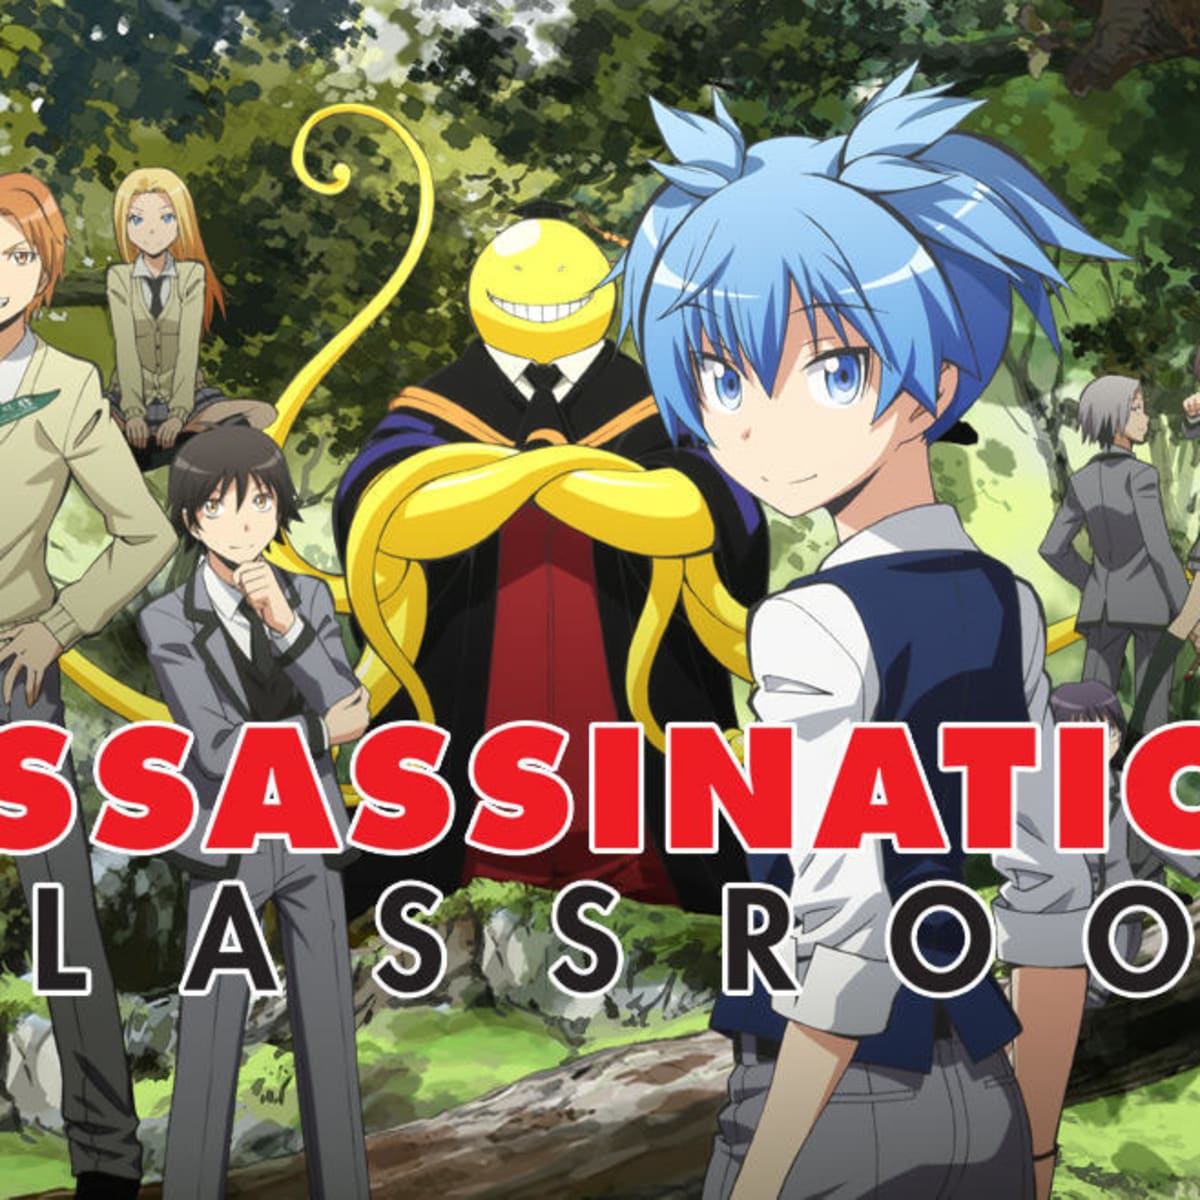 Can anyone recommend anime like assassination classroom or any anime with  bloodlust  9GAG